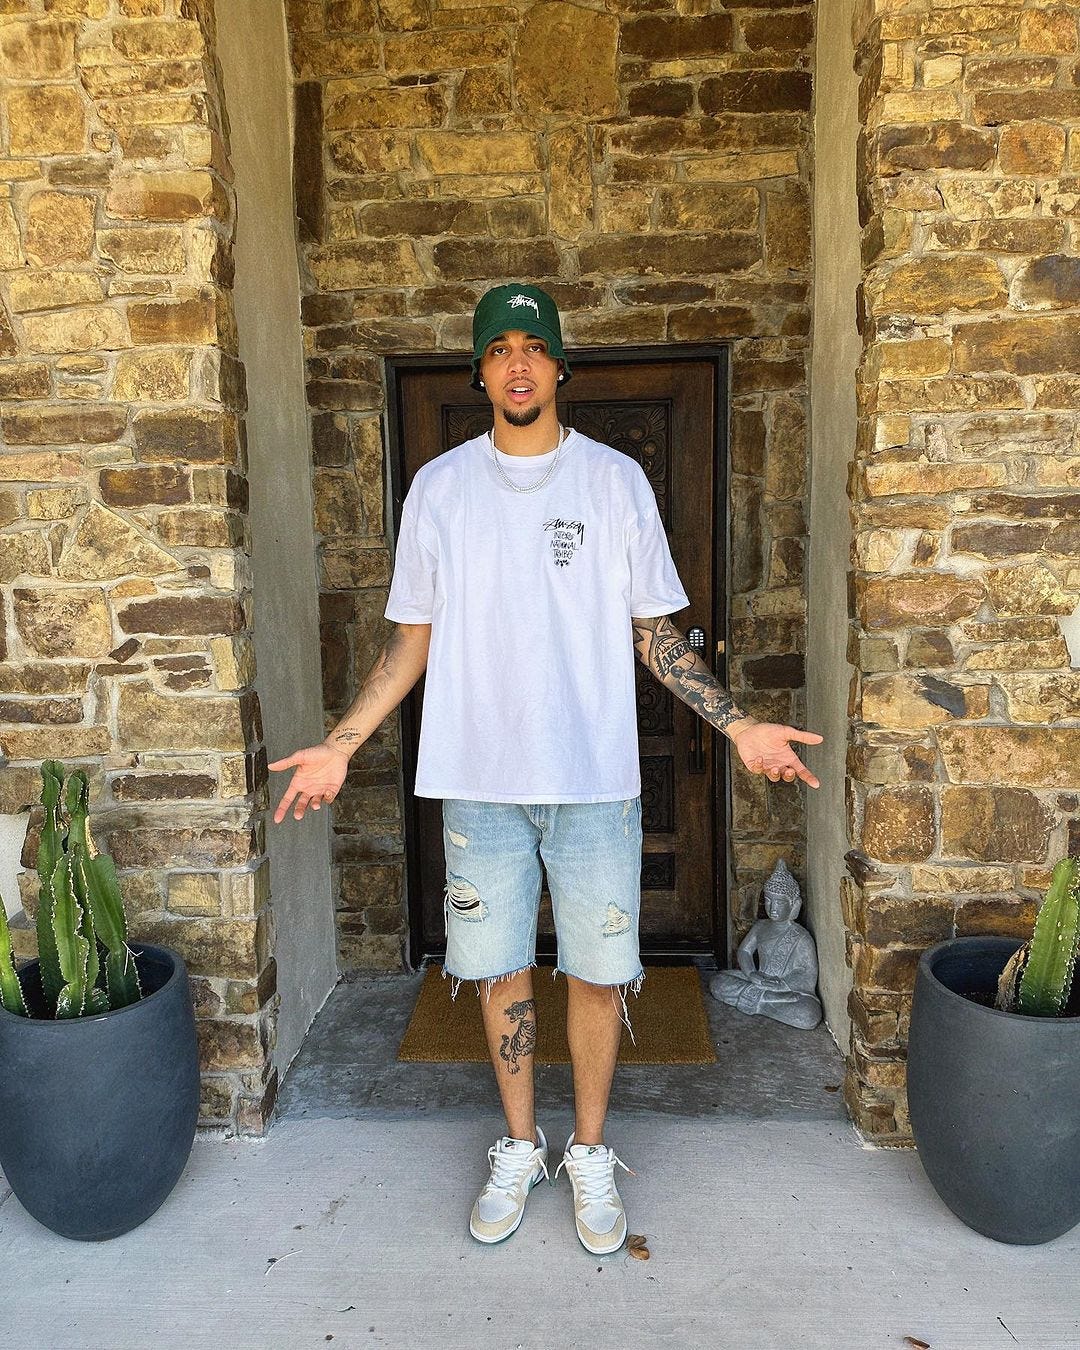 The man standing at the door is wearing a green baseball cap, a white T-shirt, light-colored ripped denim shorts and Nike sneakers